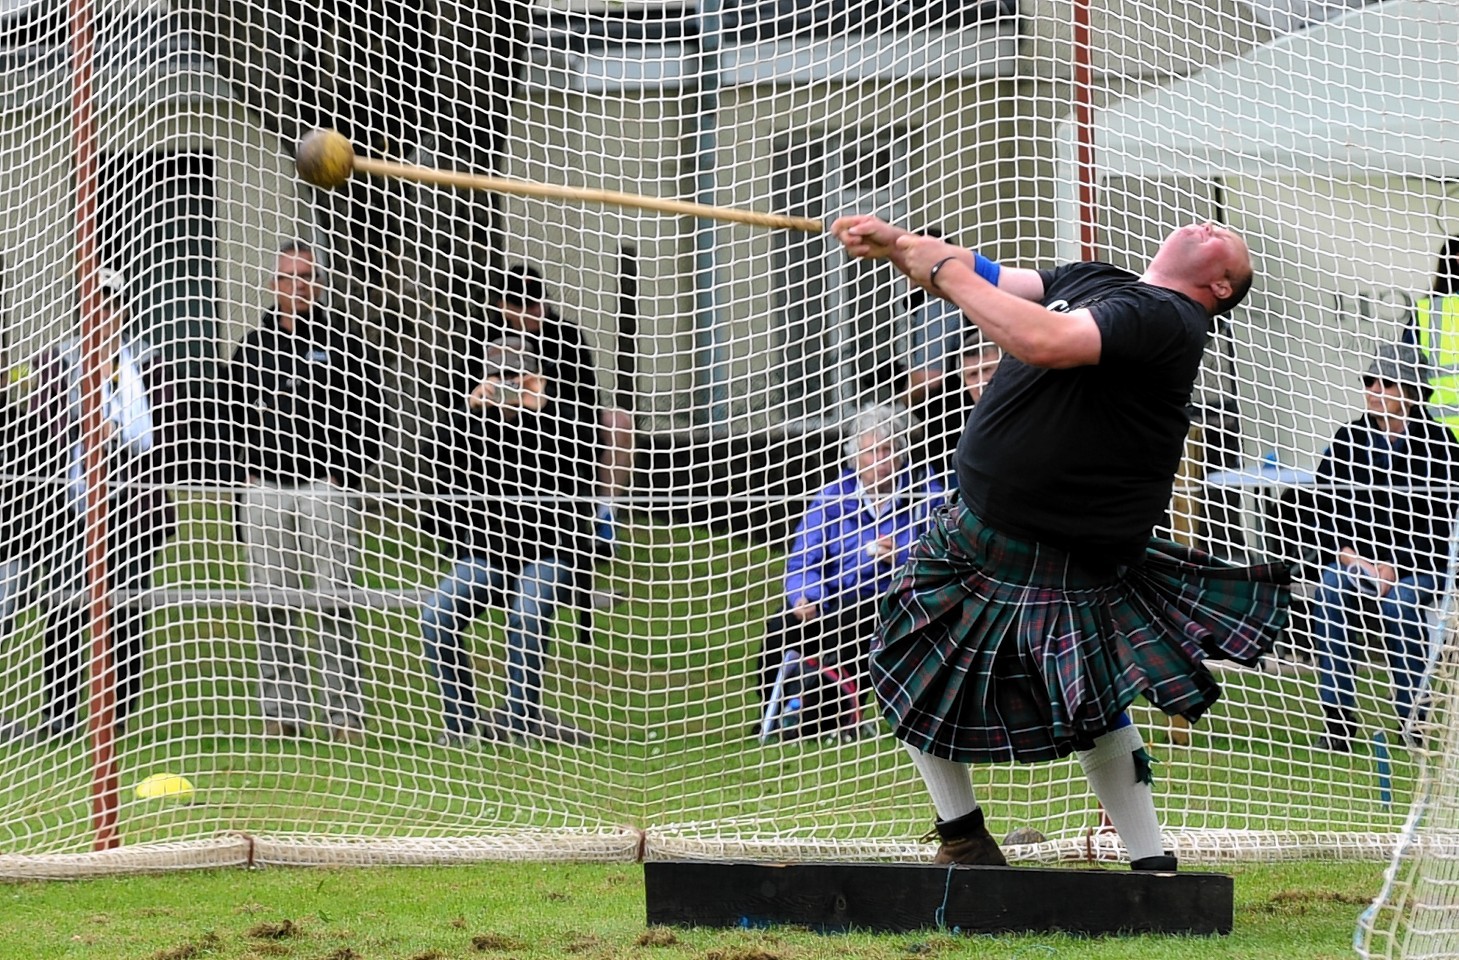 Craig Sinclair, of Drumoak, is competing for the title for the second year running